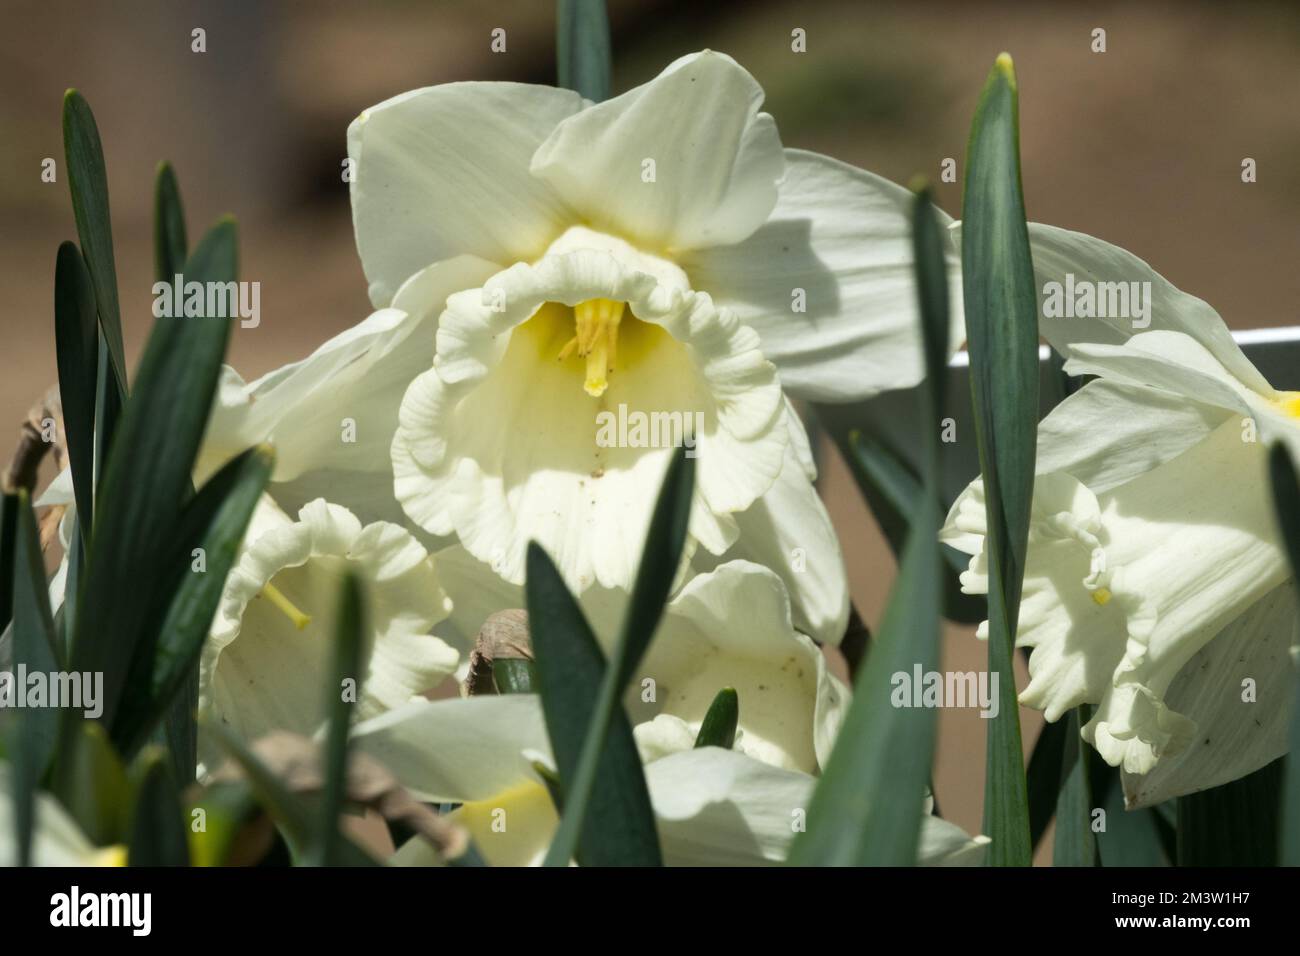 White, Daffodil, Narcissus, Flower, Spring, Season, Trumpet Daffodil, Flowering, Daffodils, Long-lived, Bulbous, Plant, Narcissus 'Mount Hood' Stock Photo